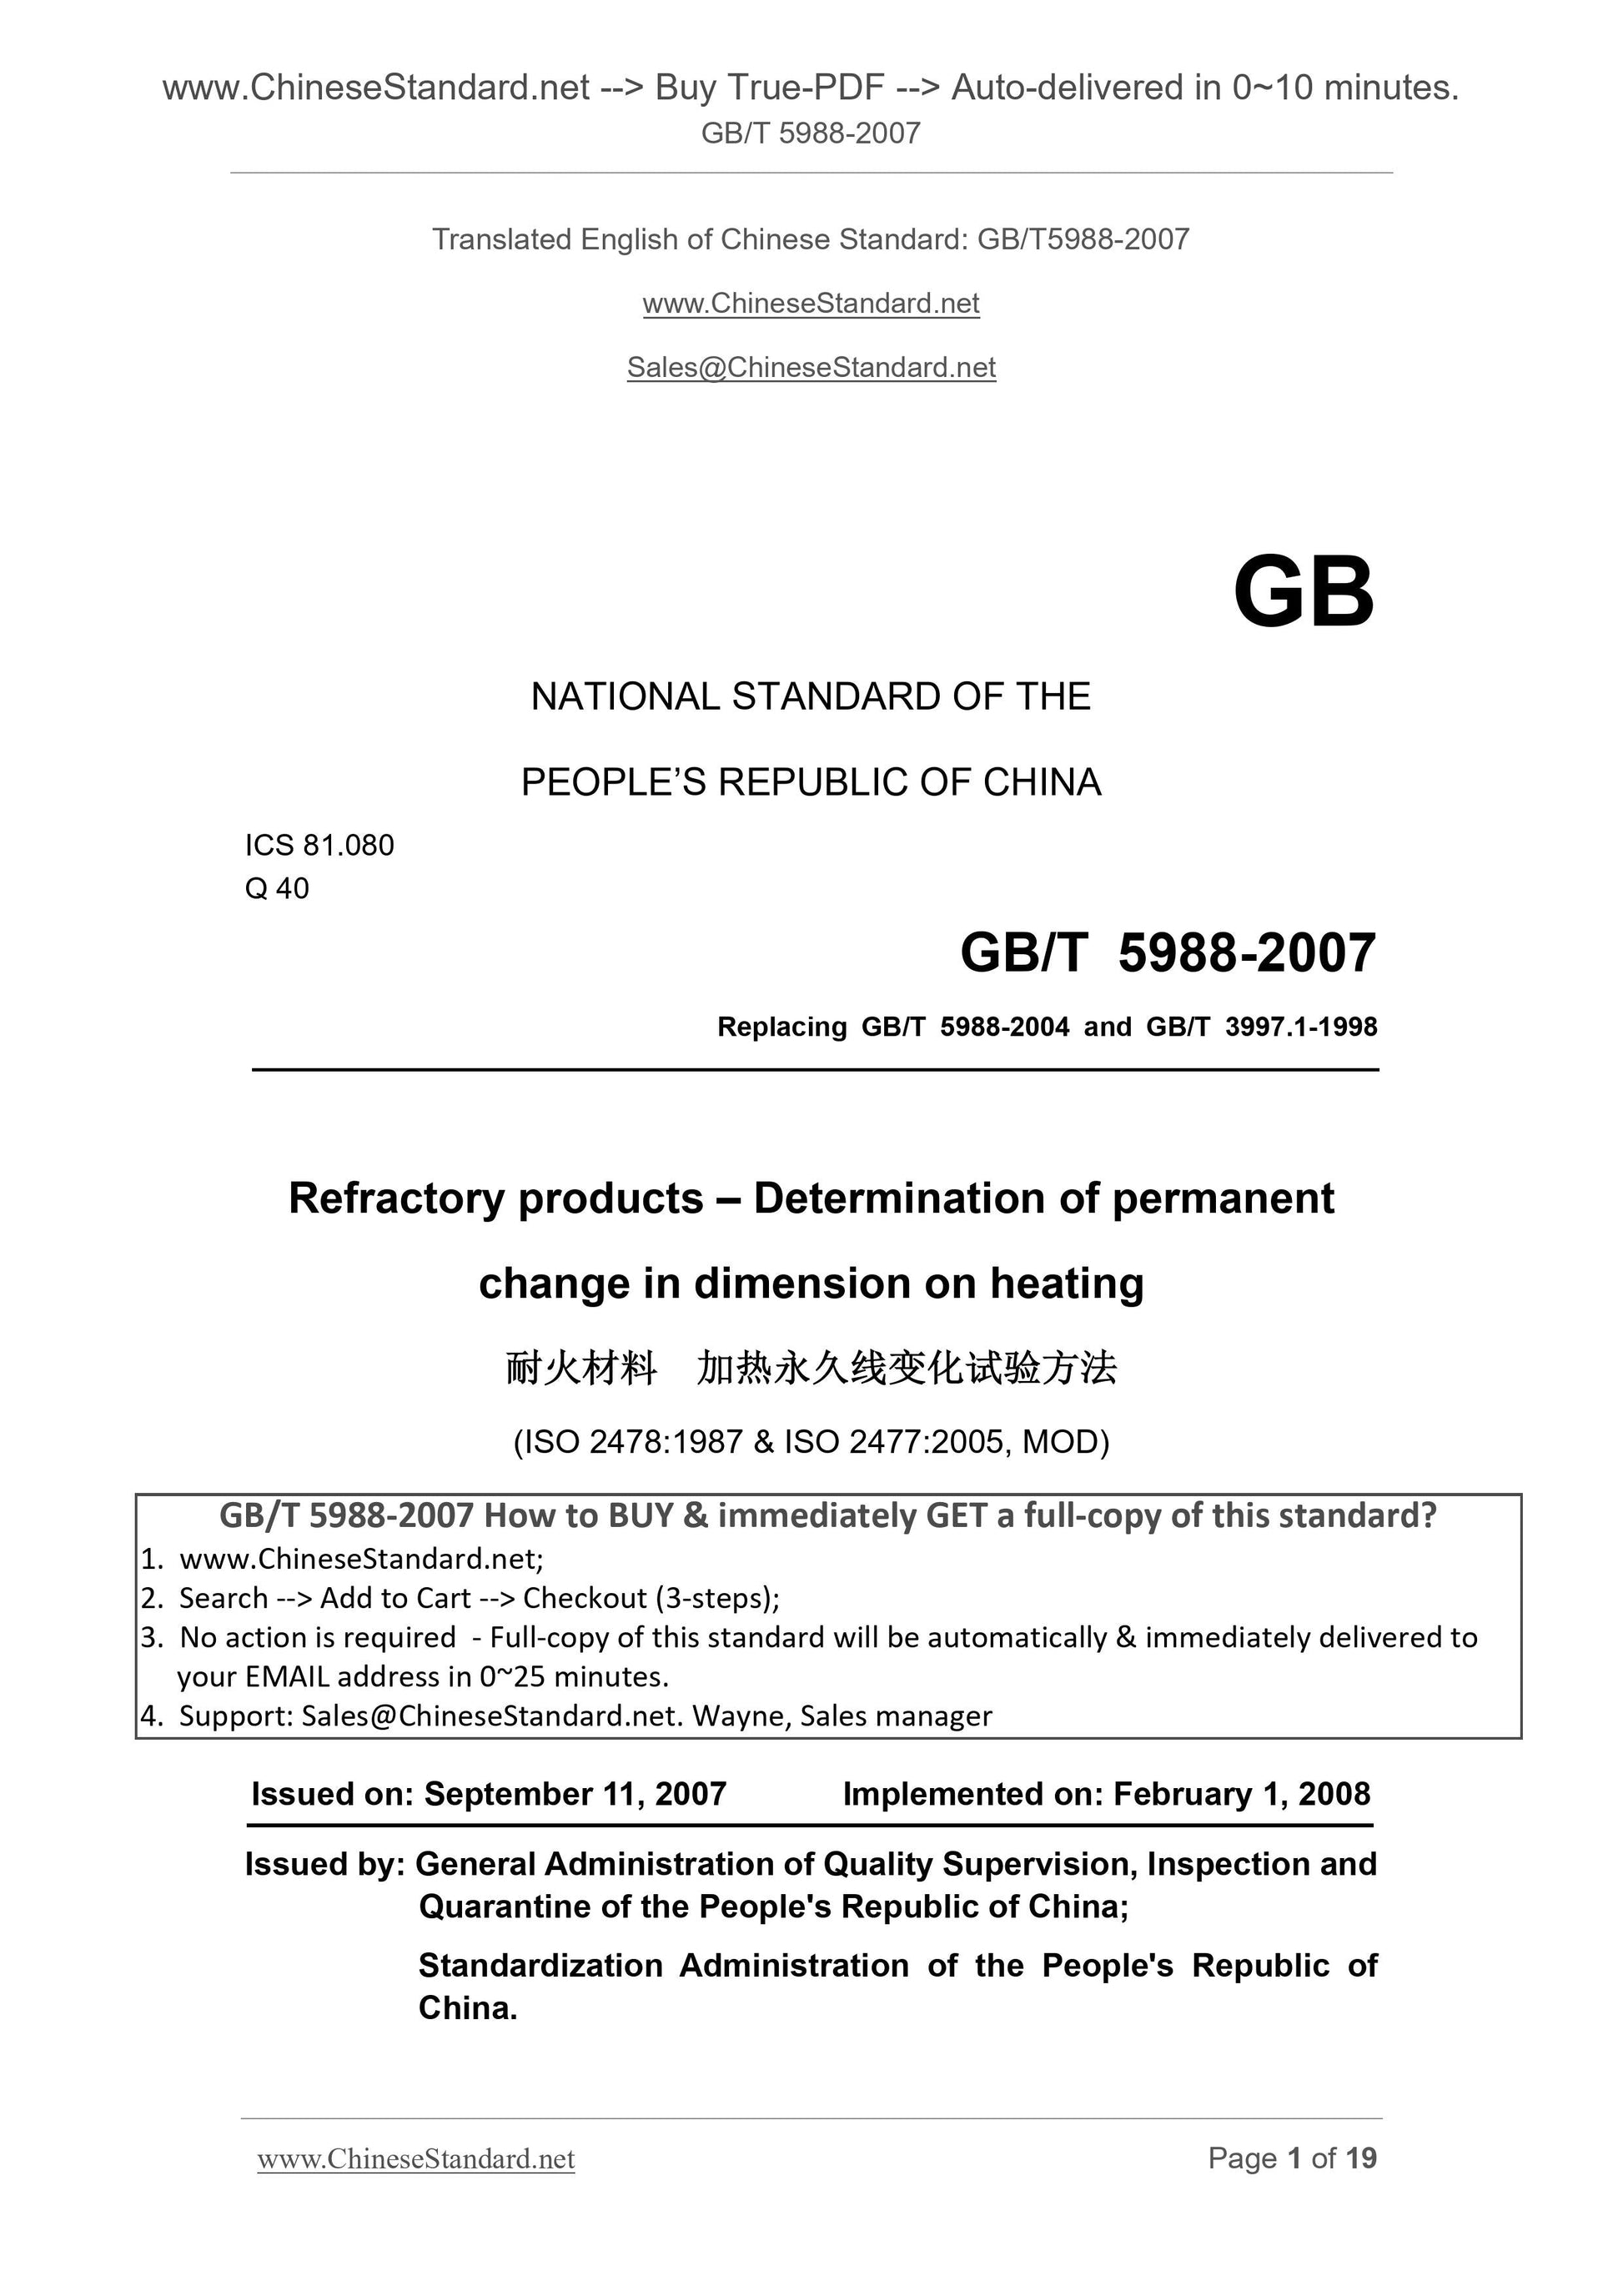 GB/T 5988-2007 Page 1